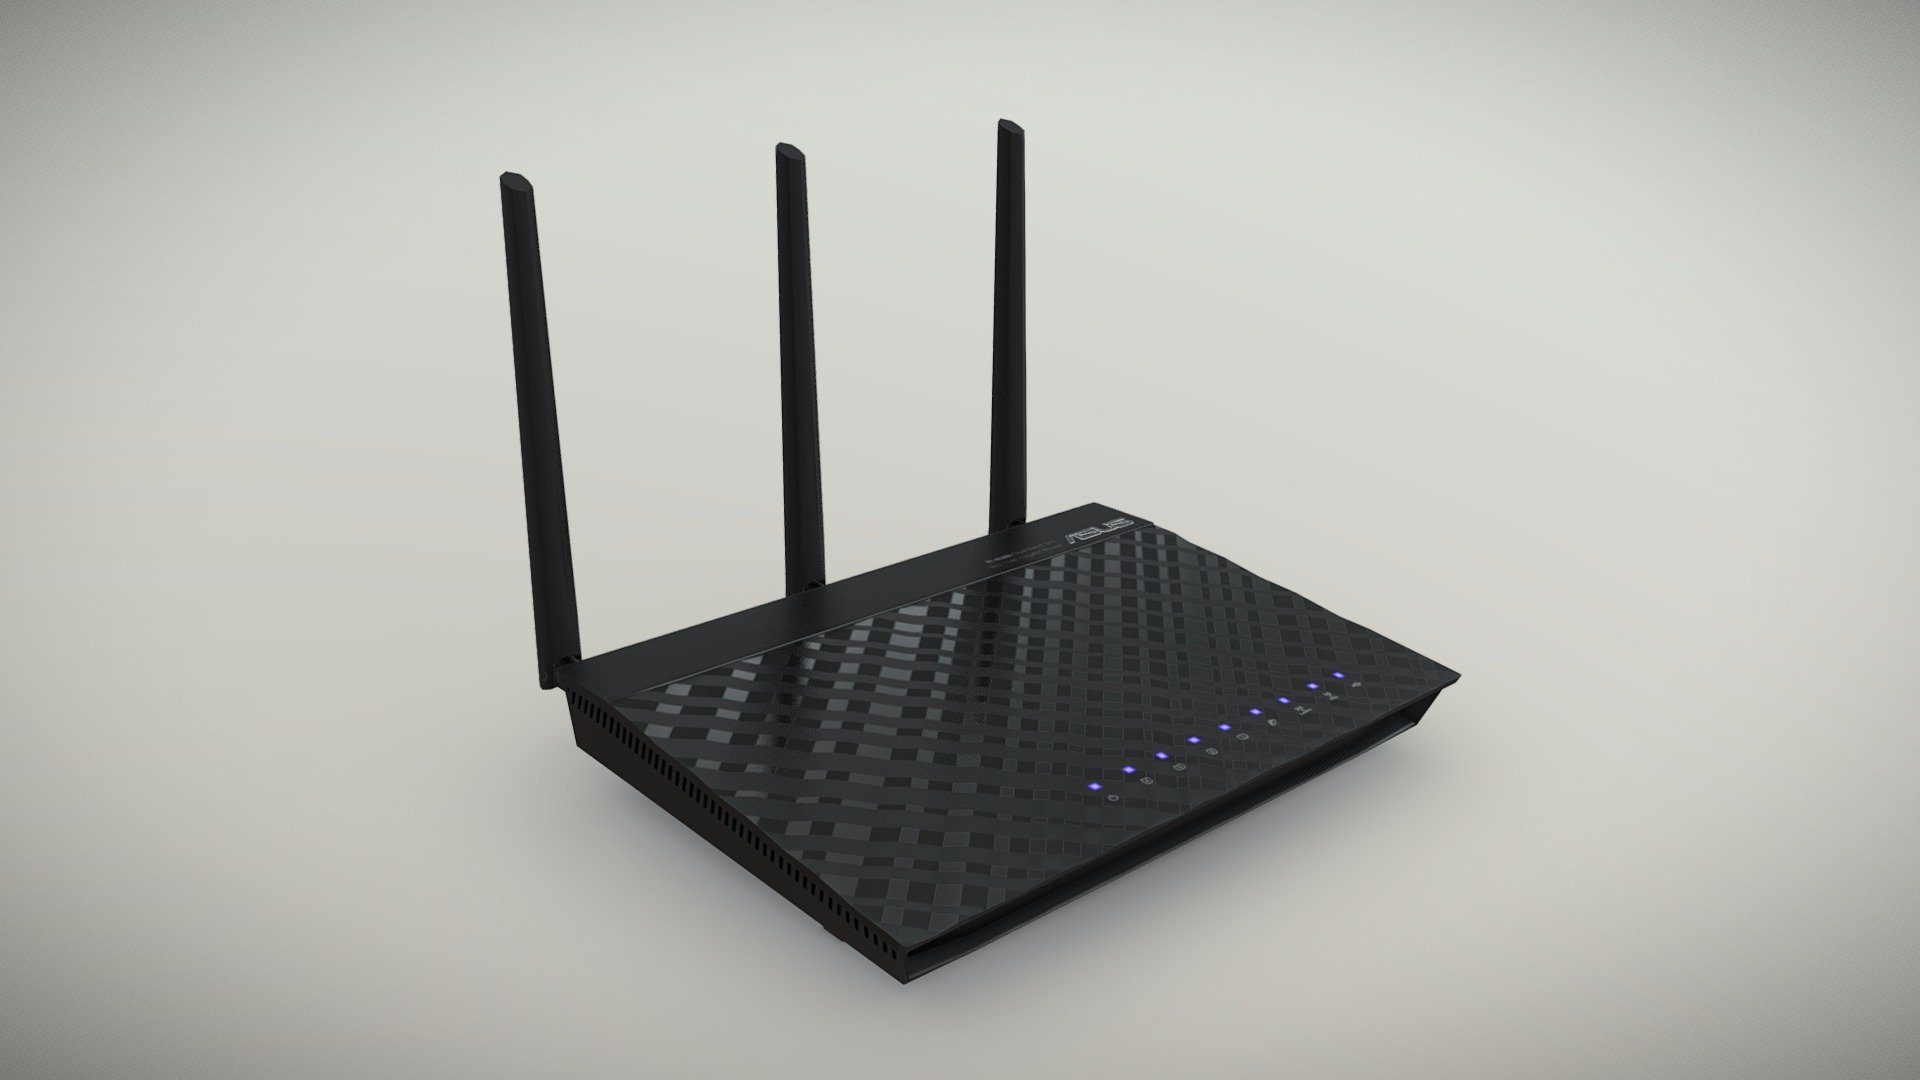 •   Let me present to you high-quality low-poly 3D model Asus RT-AC66U Dual-Band Wireless-AC1750 Gigabit router. Modeling was made with ortho-photos of real router that is why all details of design are recreated most authentically.

•    This model consists of one mesh, it is low-polygonal and it has only one material.

•   The total of the main textures is 5. Resolution of all textures is 4096 pixels square aspect ratio in .png format. Also there is original texture file .PSD format in separate archive.

•   Polygon count of the model is – 1667.

•   The model has correct dimensions in real-world scale. All parts grouped and named correctly.

•   To use the model in other 3D programs there are scenes saved in formats .fbx, .obj, .DAE, .max (2010 version).

Note: If you see some artifacts on the textures, it means compression works in the Viewer. We recommend setting HD quality for textures. But anyway, original textures have no artifacts 3d model